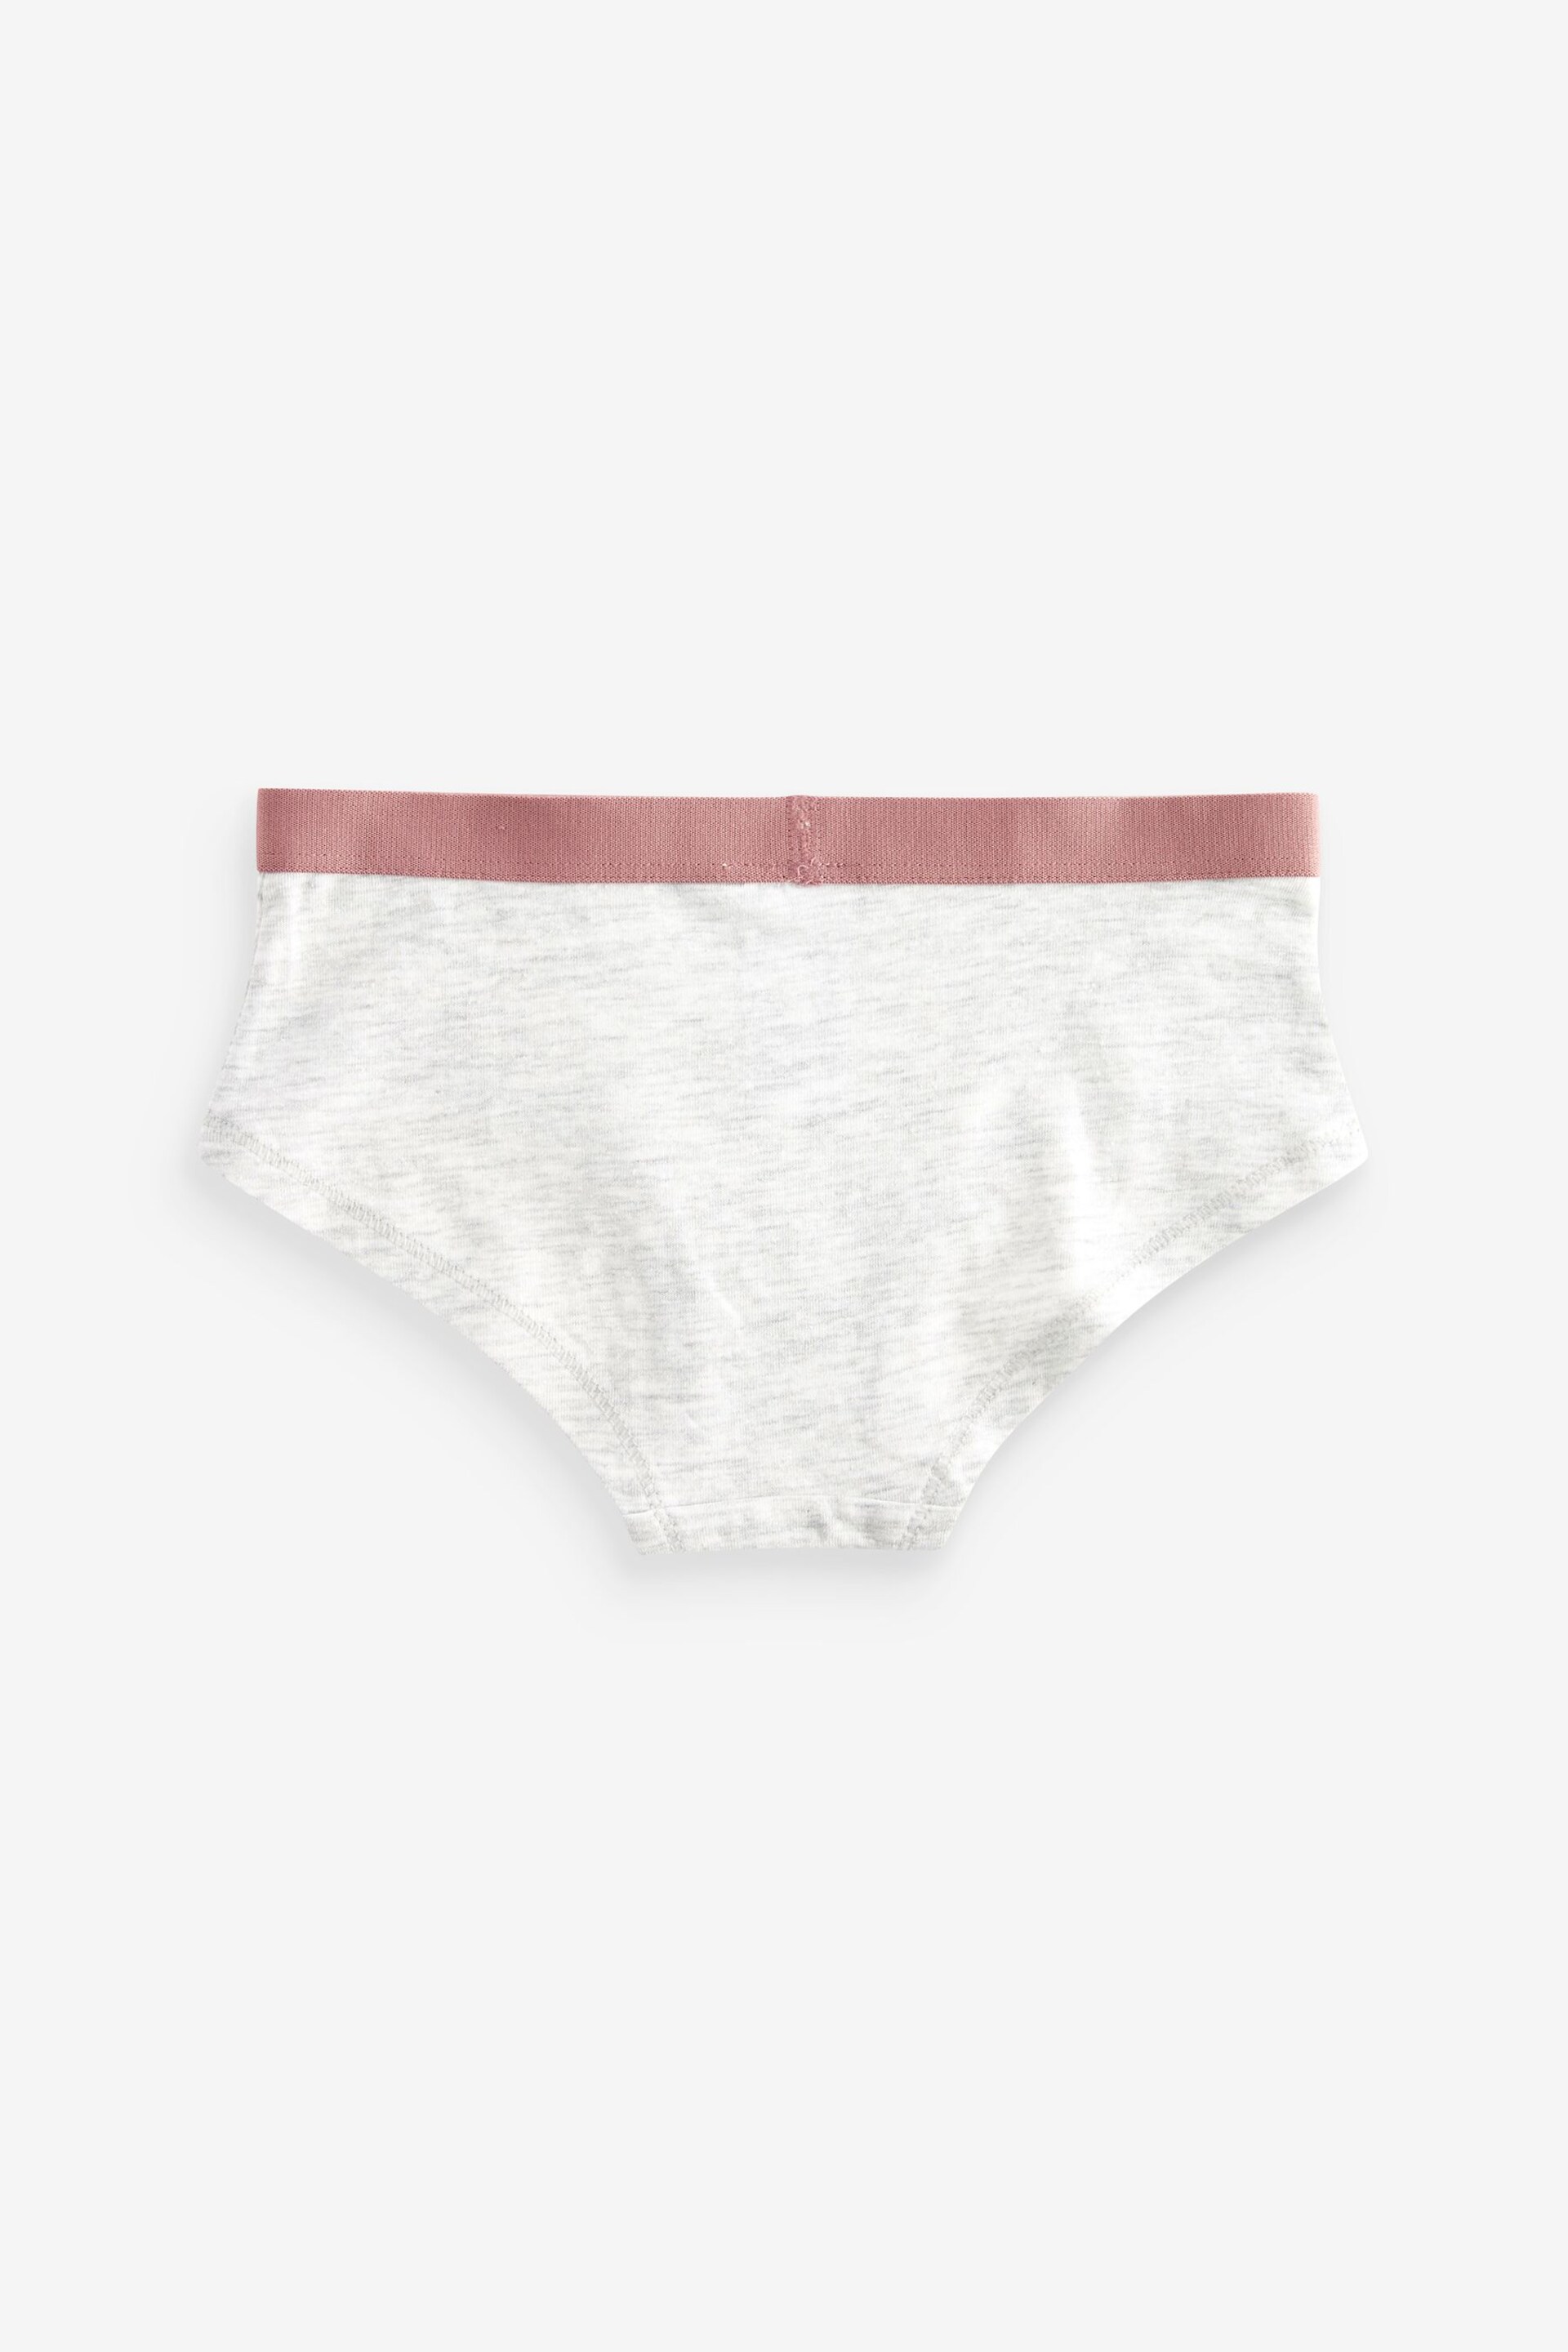 Grey/Pink/White Sparkle Waistband Hipsters 7 Pack (2-16yrs) - Image 2 of 3